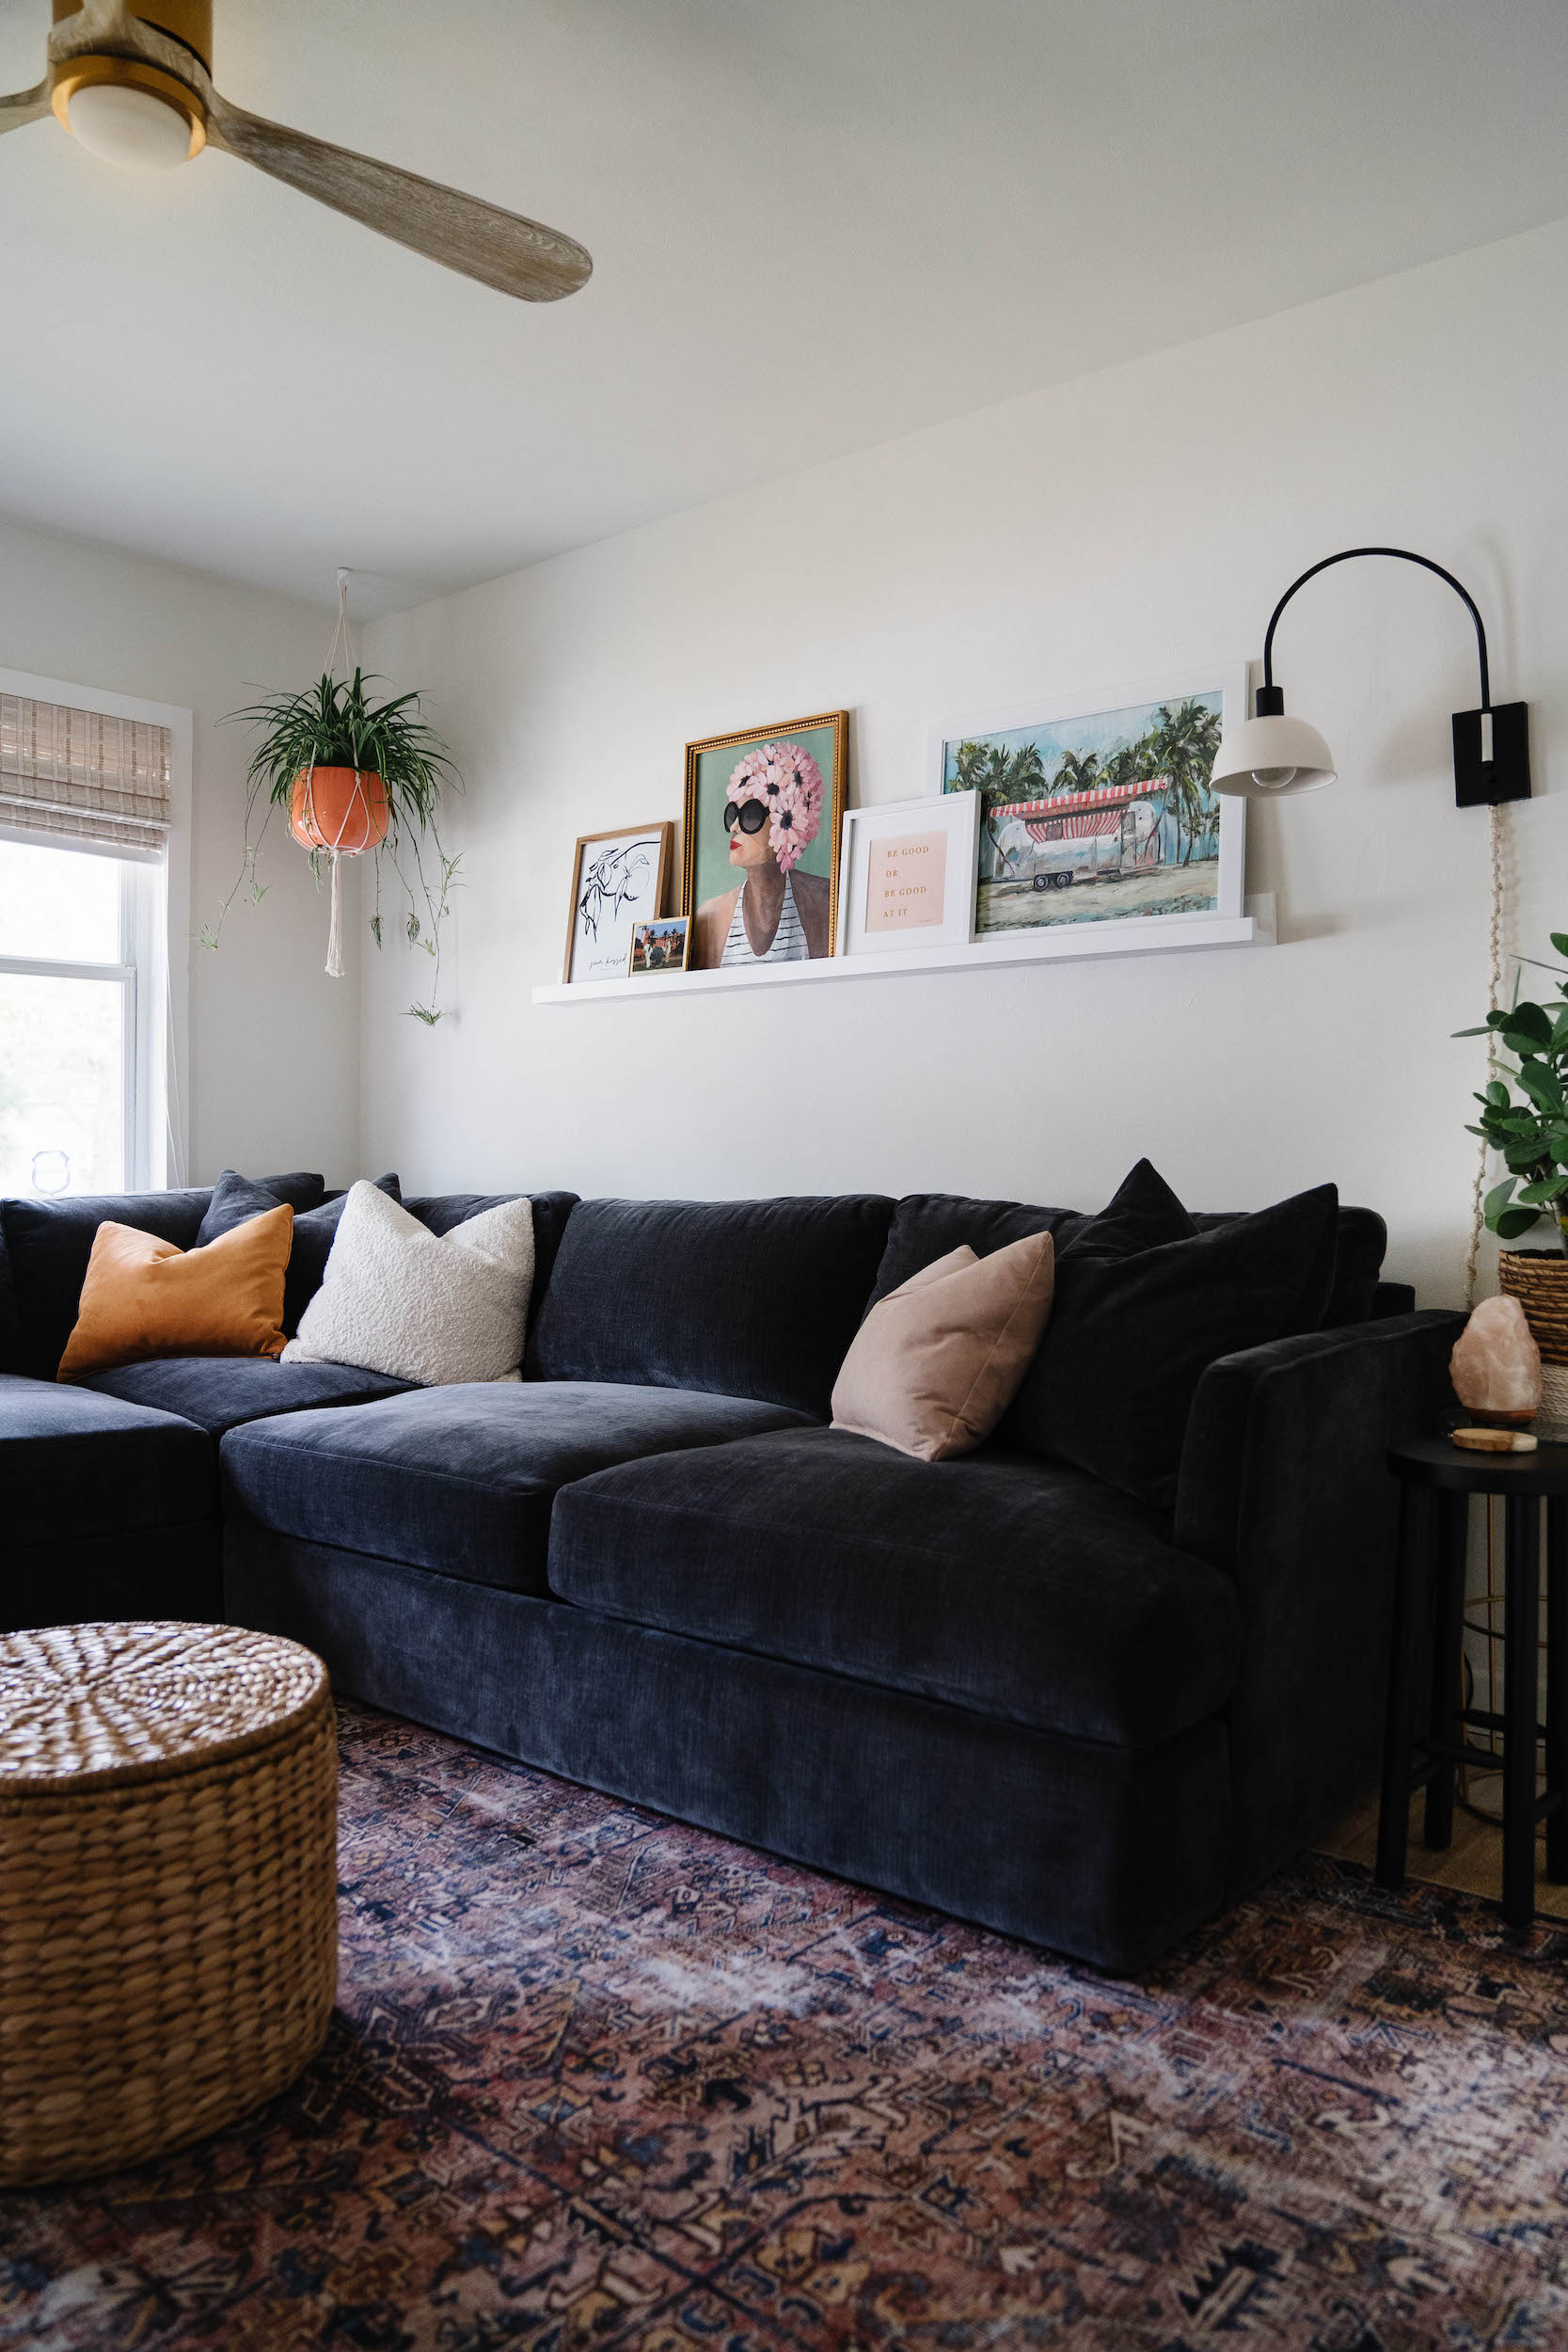 Small Cozy Living Room with Black Sofa - Blushing Bungalow | So Cute ...